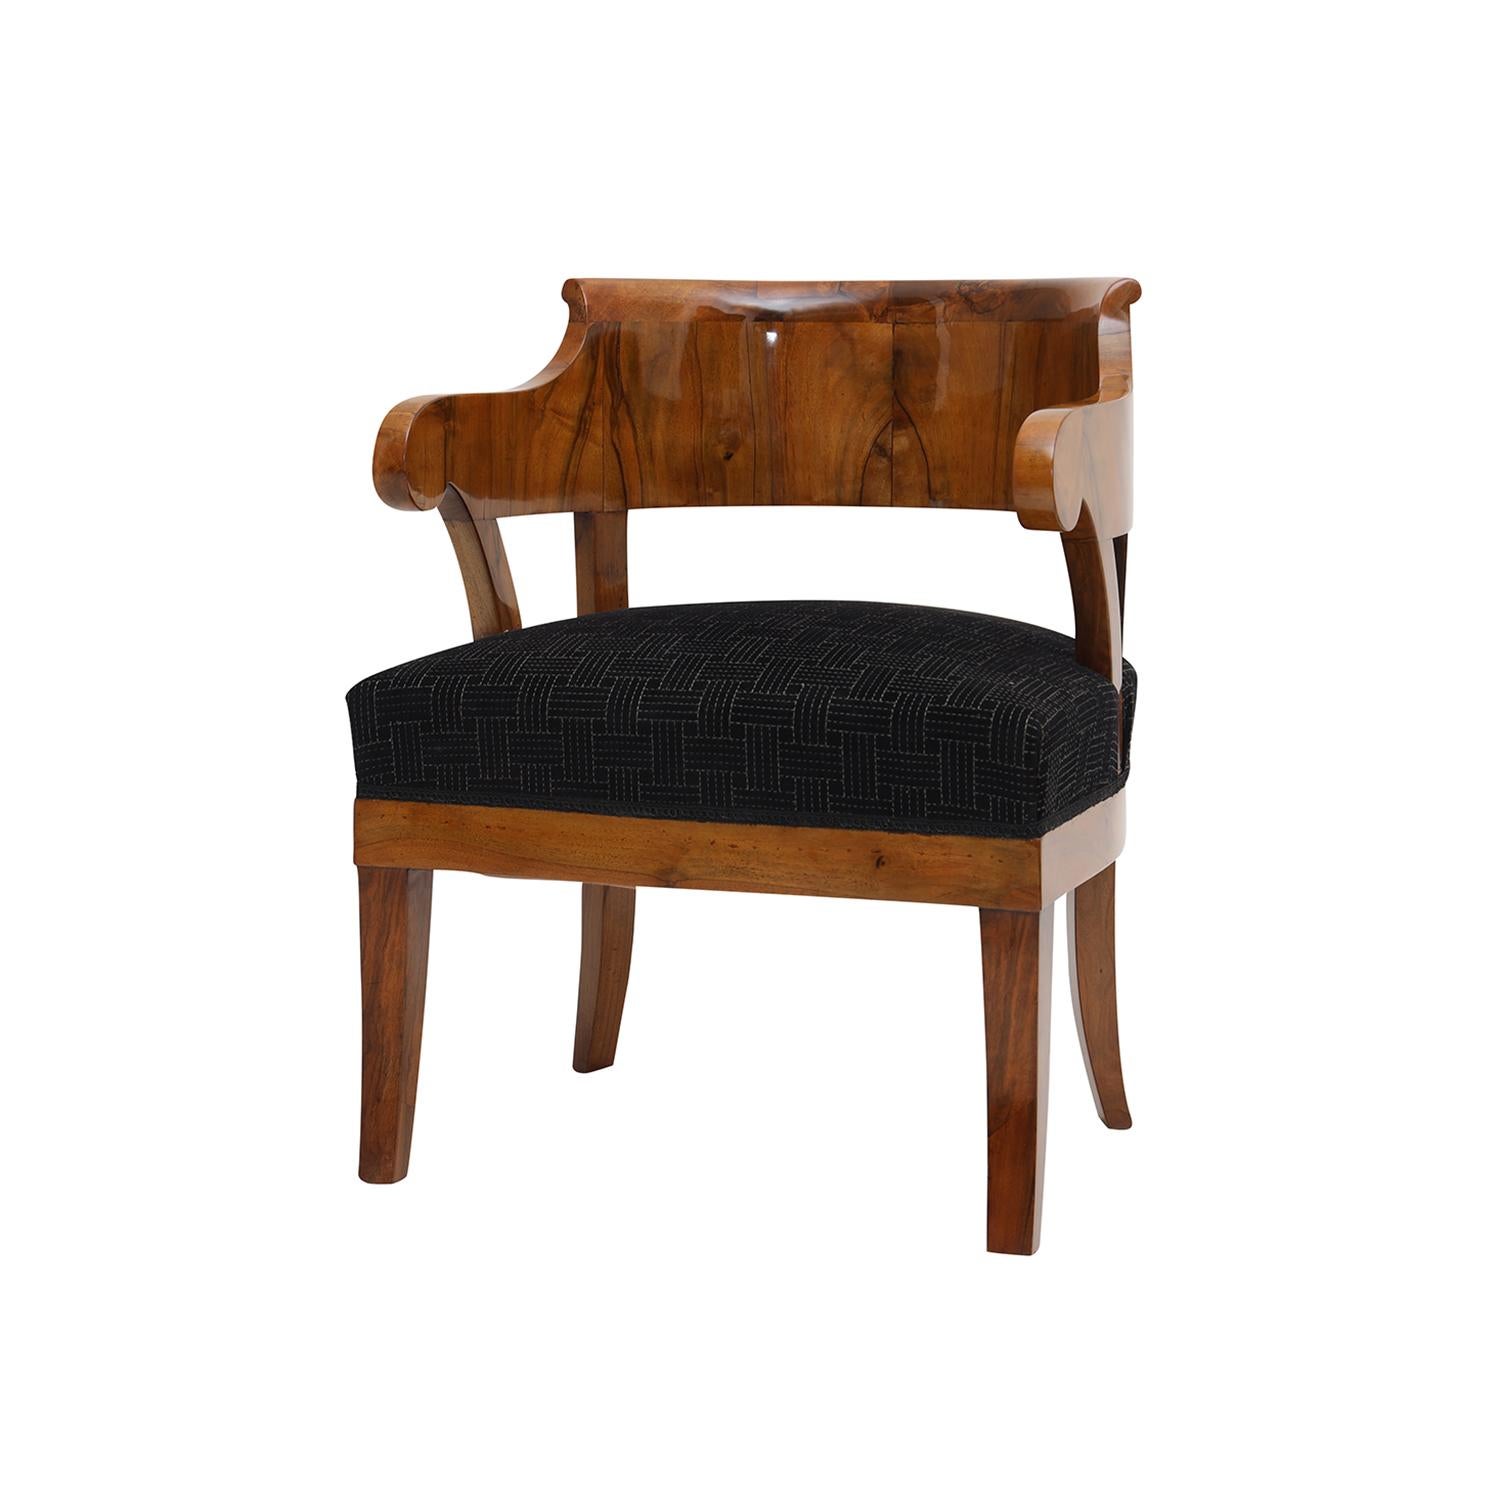 19th Century German Biedermeier Antique Shellac Polished Mahogany Armchair In Good Condition For Sale In West Palm Beach, FL